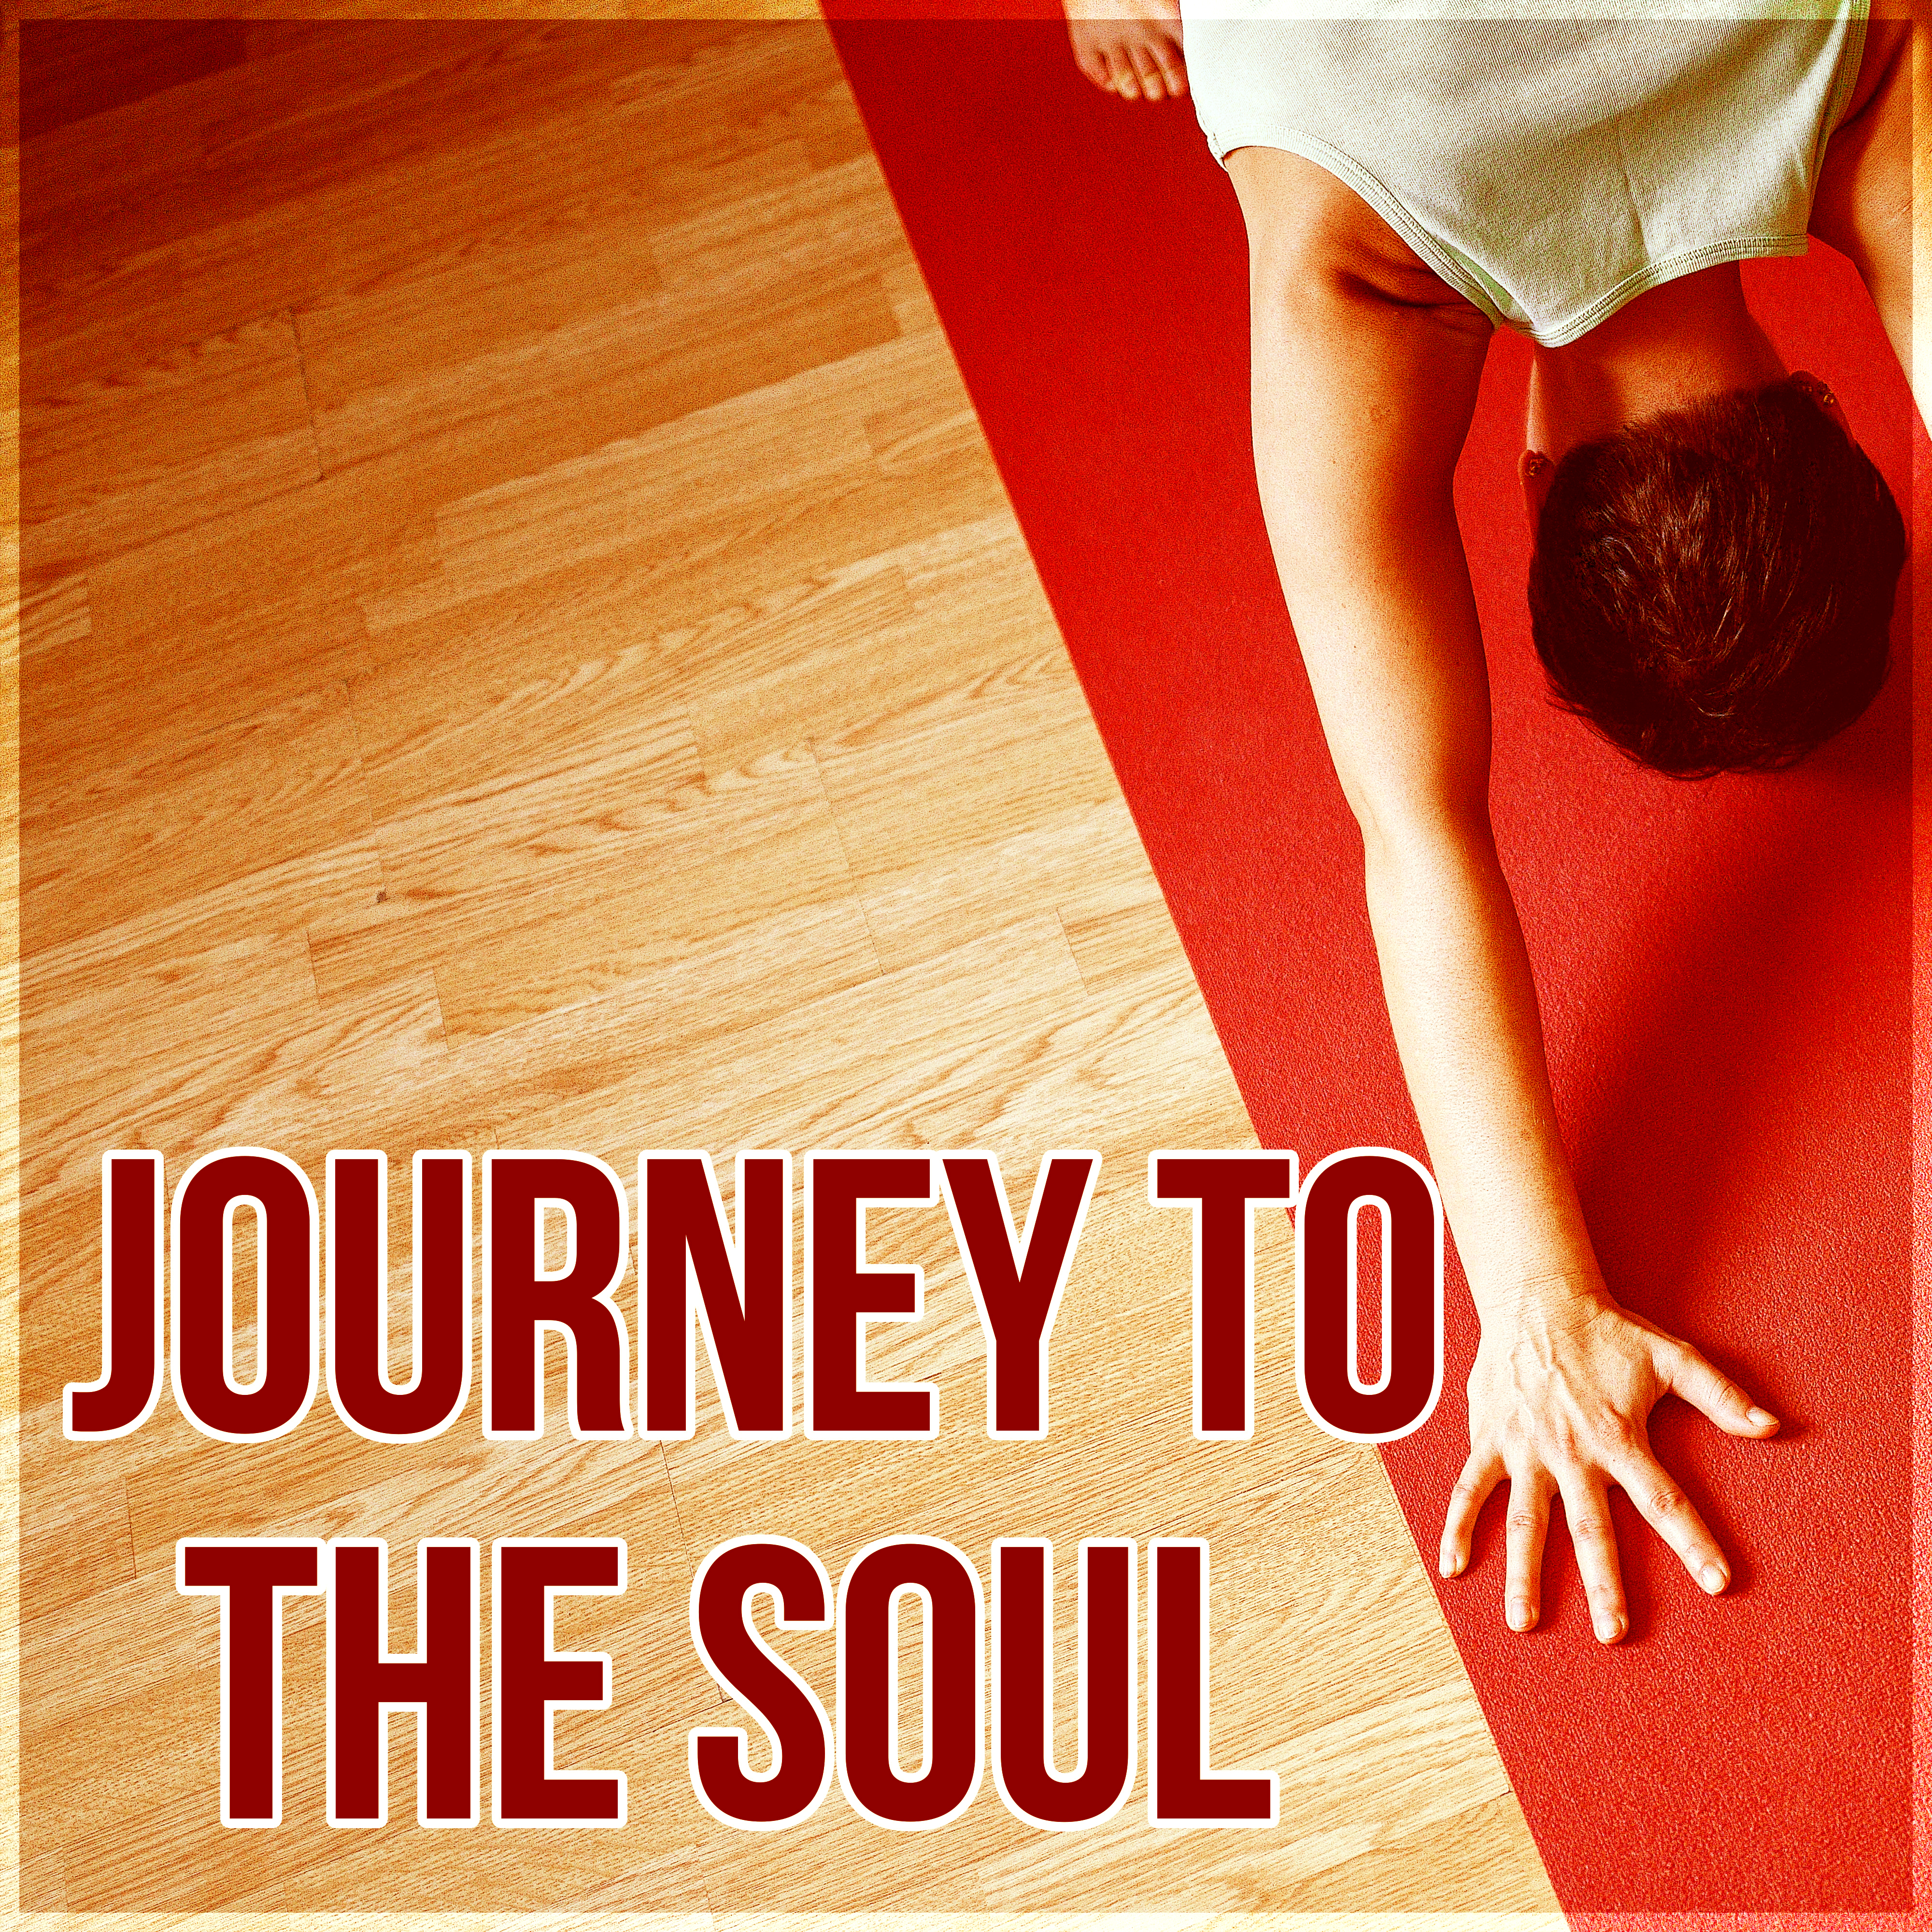 Journey to the Soul - Relaxation & Meditation, Endlessly Soothing Music, Instrumental Nature Sounds, Ocean Waves, Luxury Spa, Sensual Massage Music for Aromatherapy